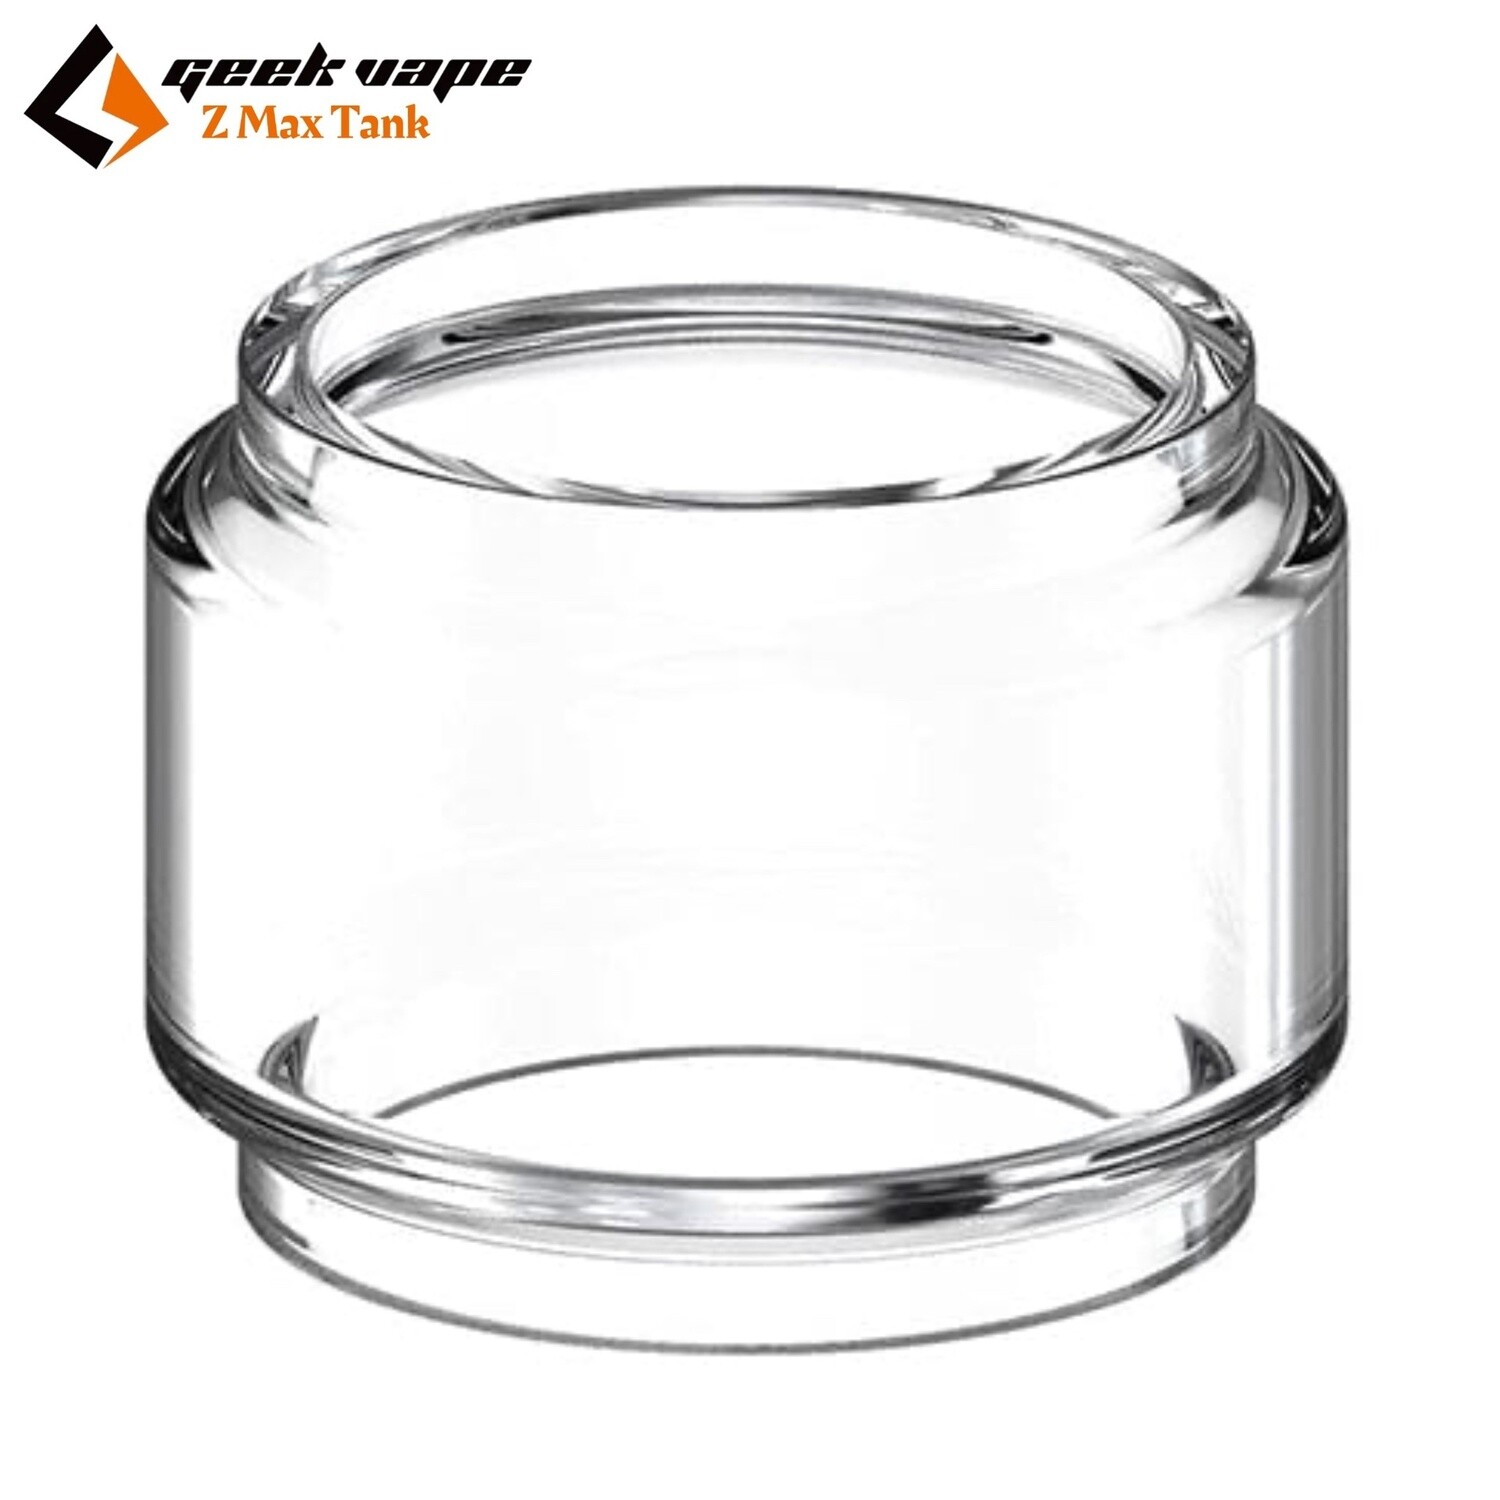 GeekVape® Z Max Tank Replacement Glass